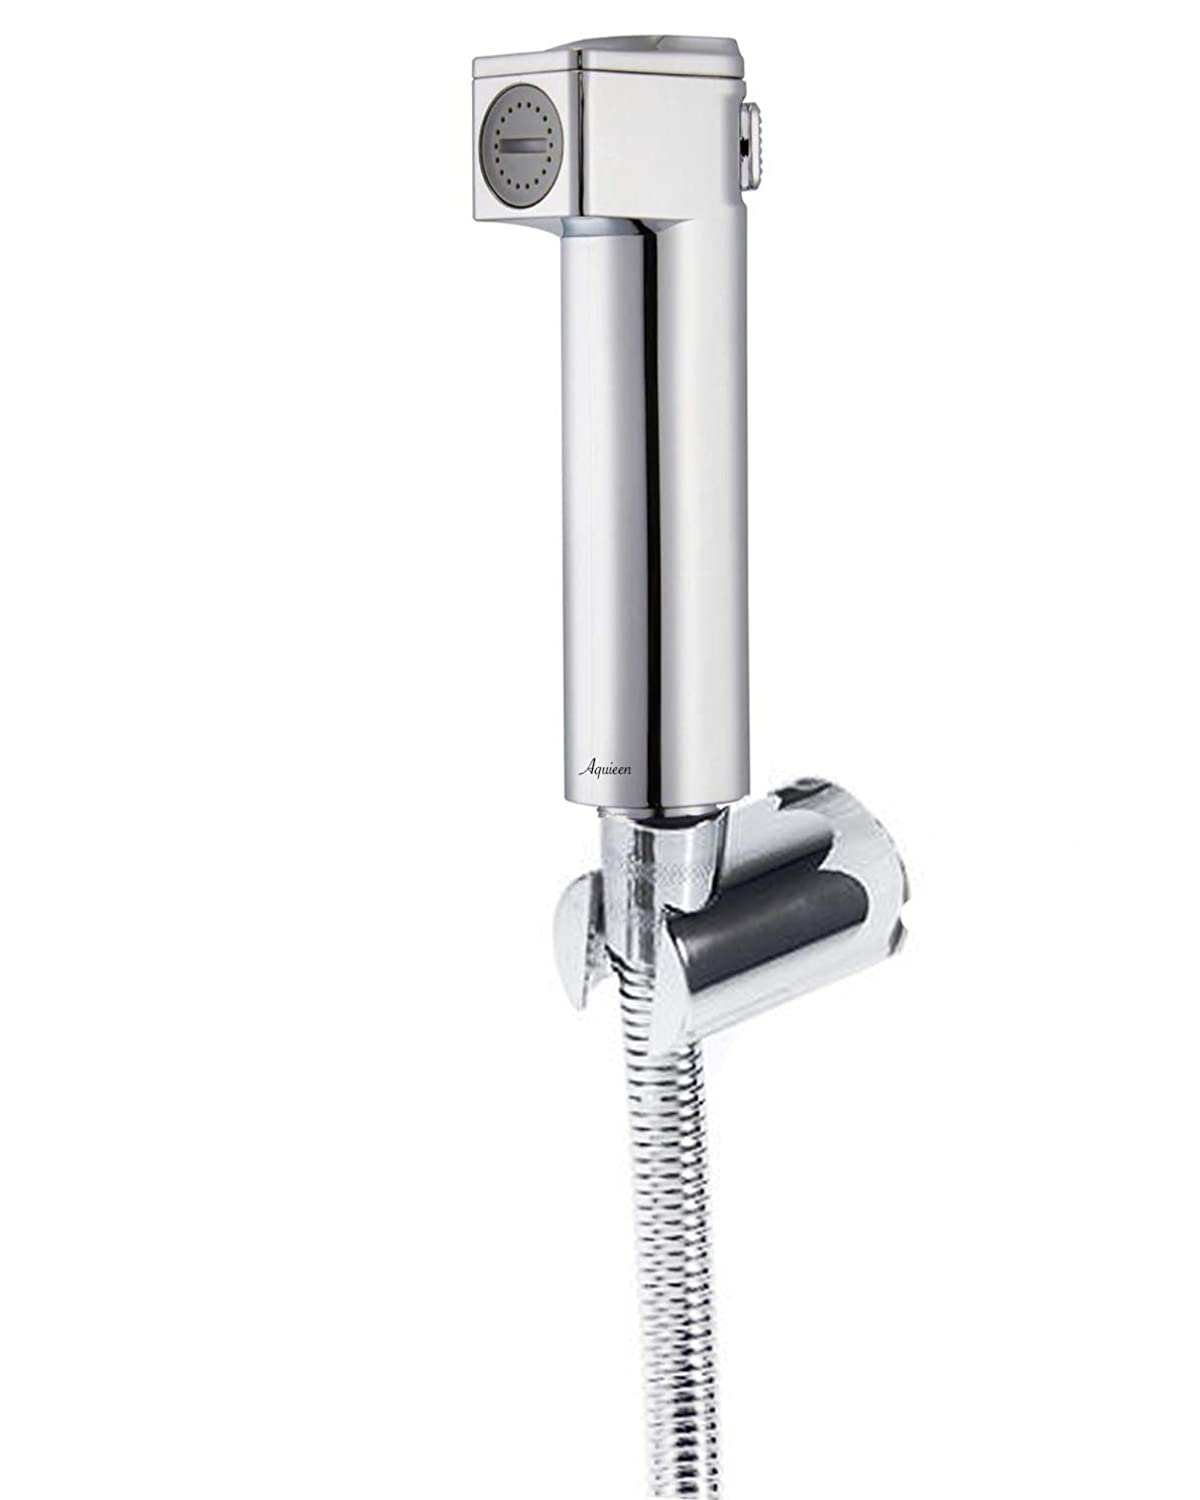 Aquieen ABS Health Faucet Set with 1 Meter SS 304 Shower Tube & Wall Hook (Ceramica Chrome)